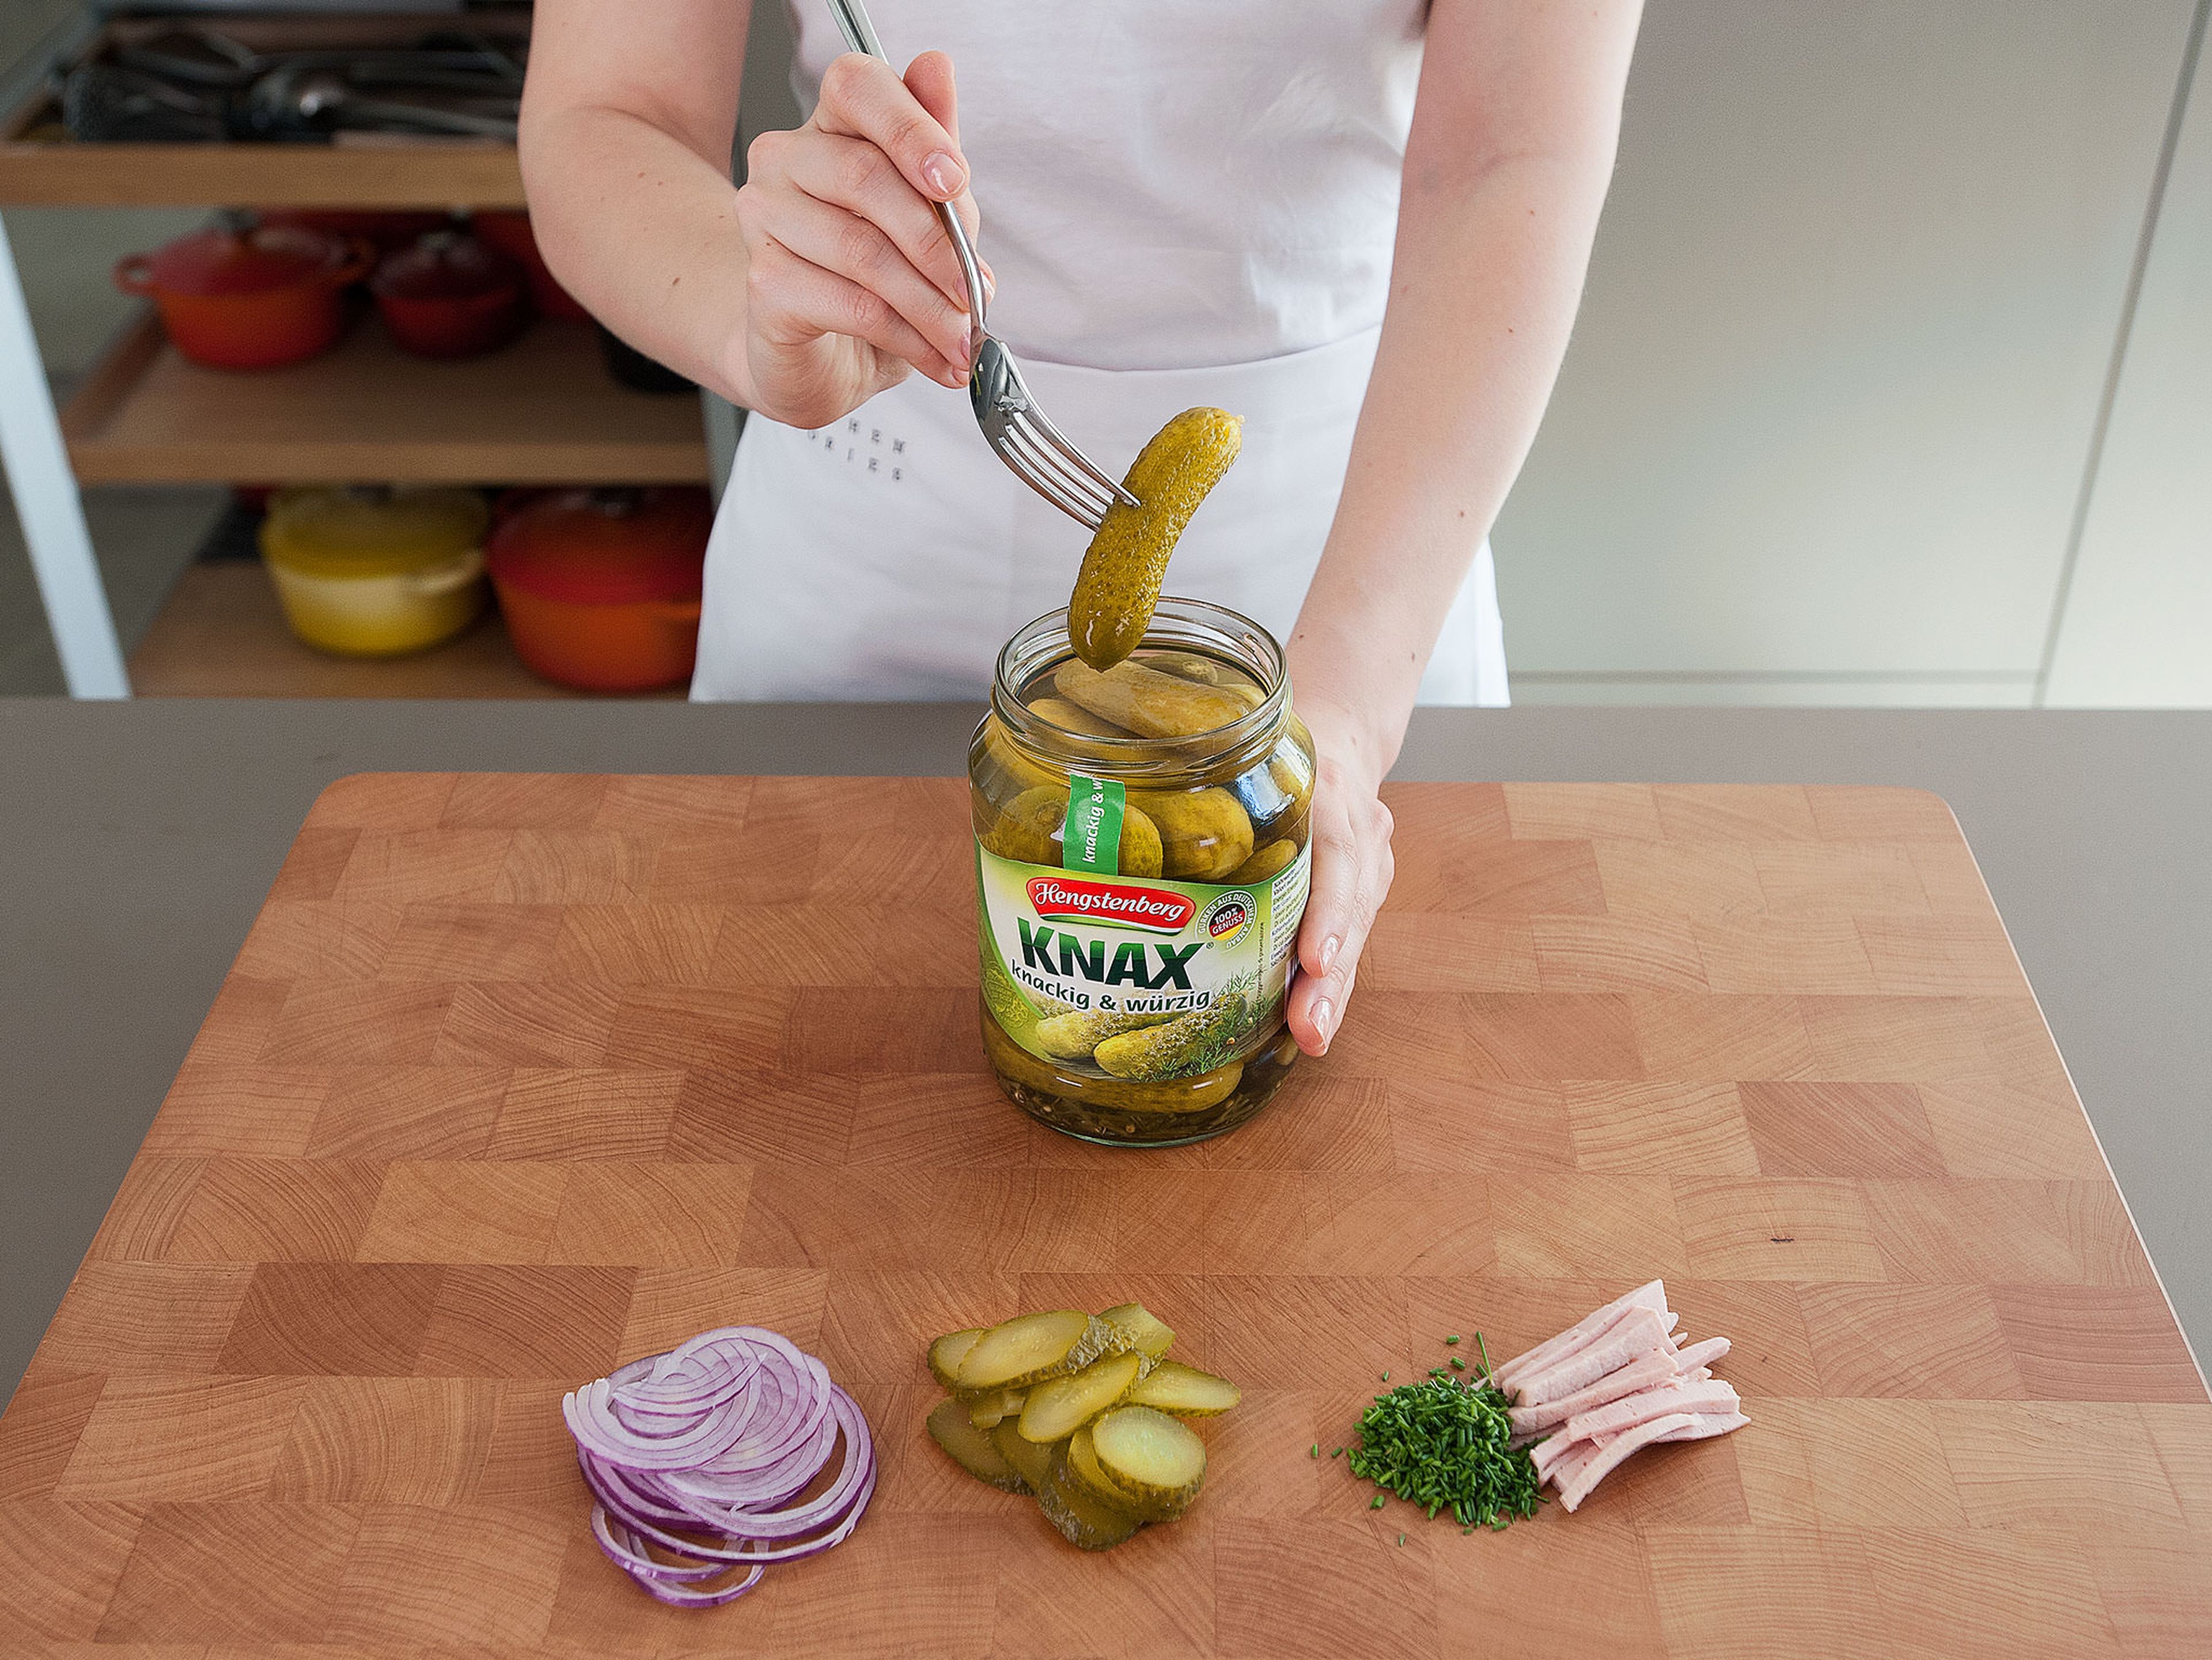 Finely chop chives. Cut meat into fine strips and red onions into fine rings. Cut pickles into thin slices.